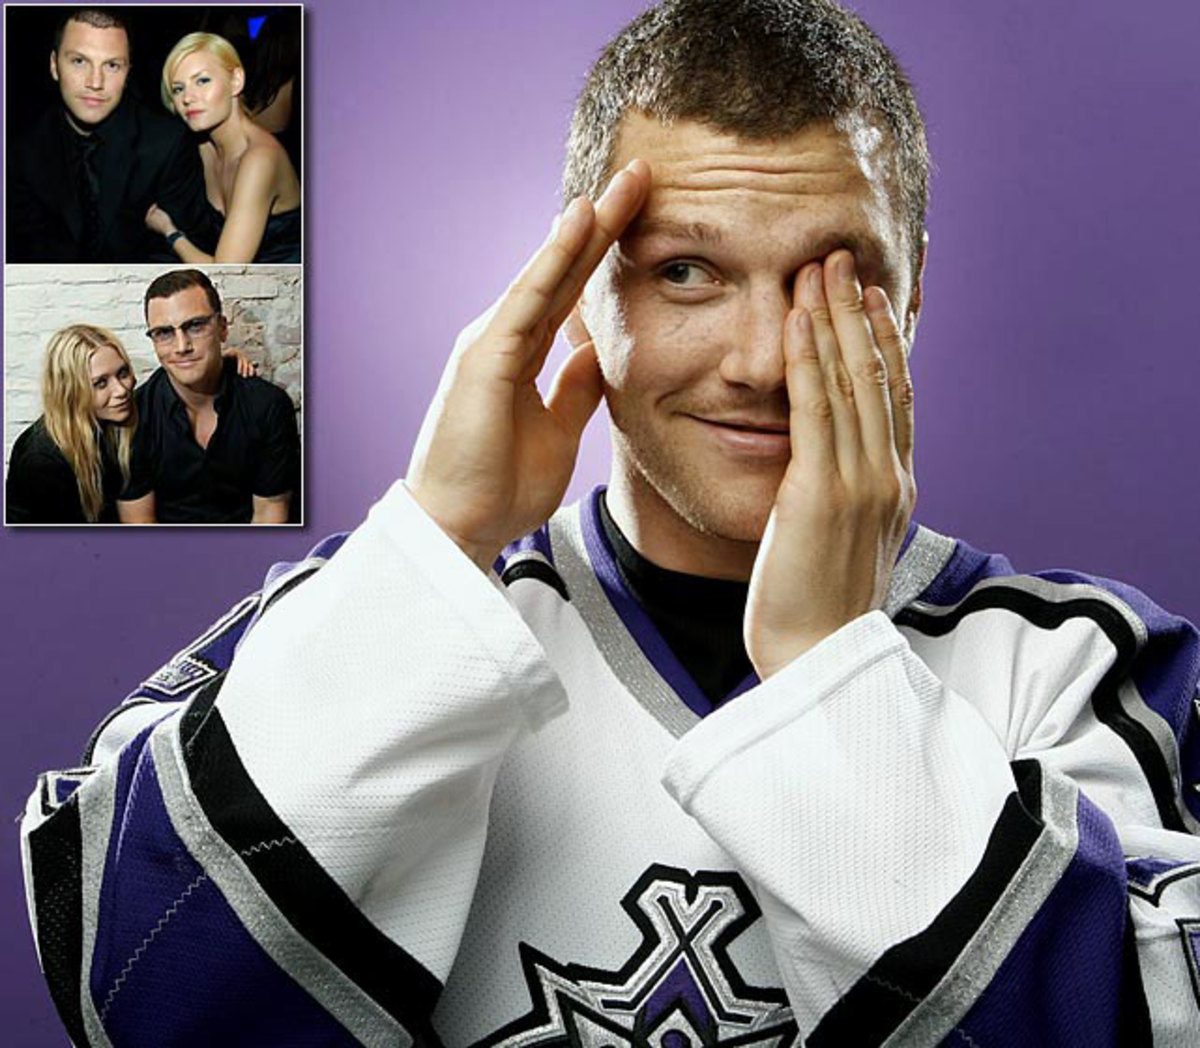 The Adventures of Sean Avery - Sports Illustrated